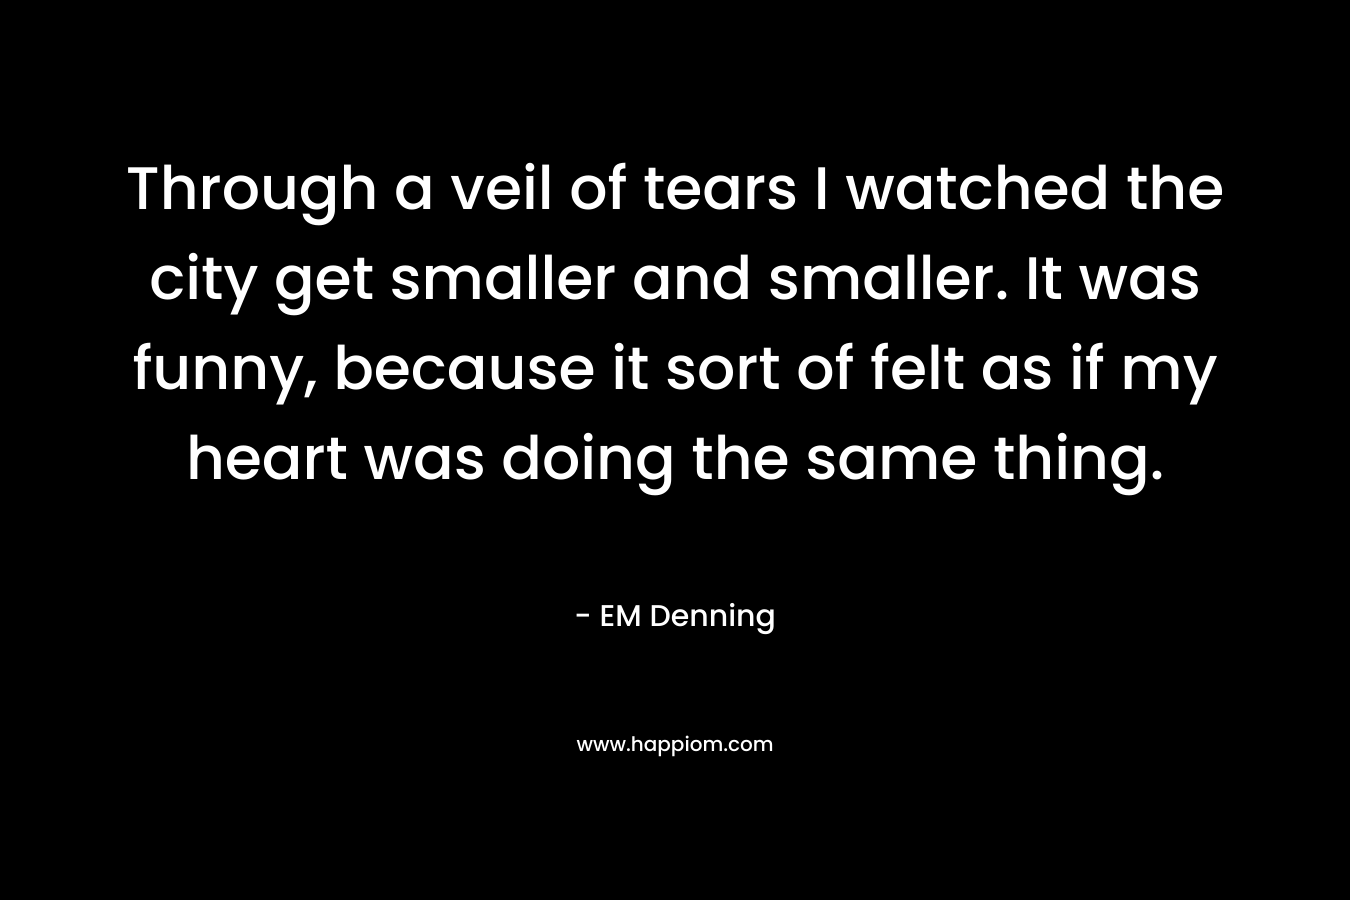 Through a veil of tears I watched the city get smaller and smaller. It was funny, because it sort of felt as if my heart was doing the same thing. – EM Denning